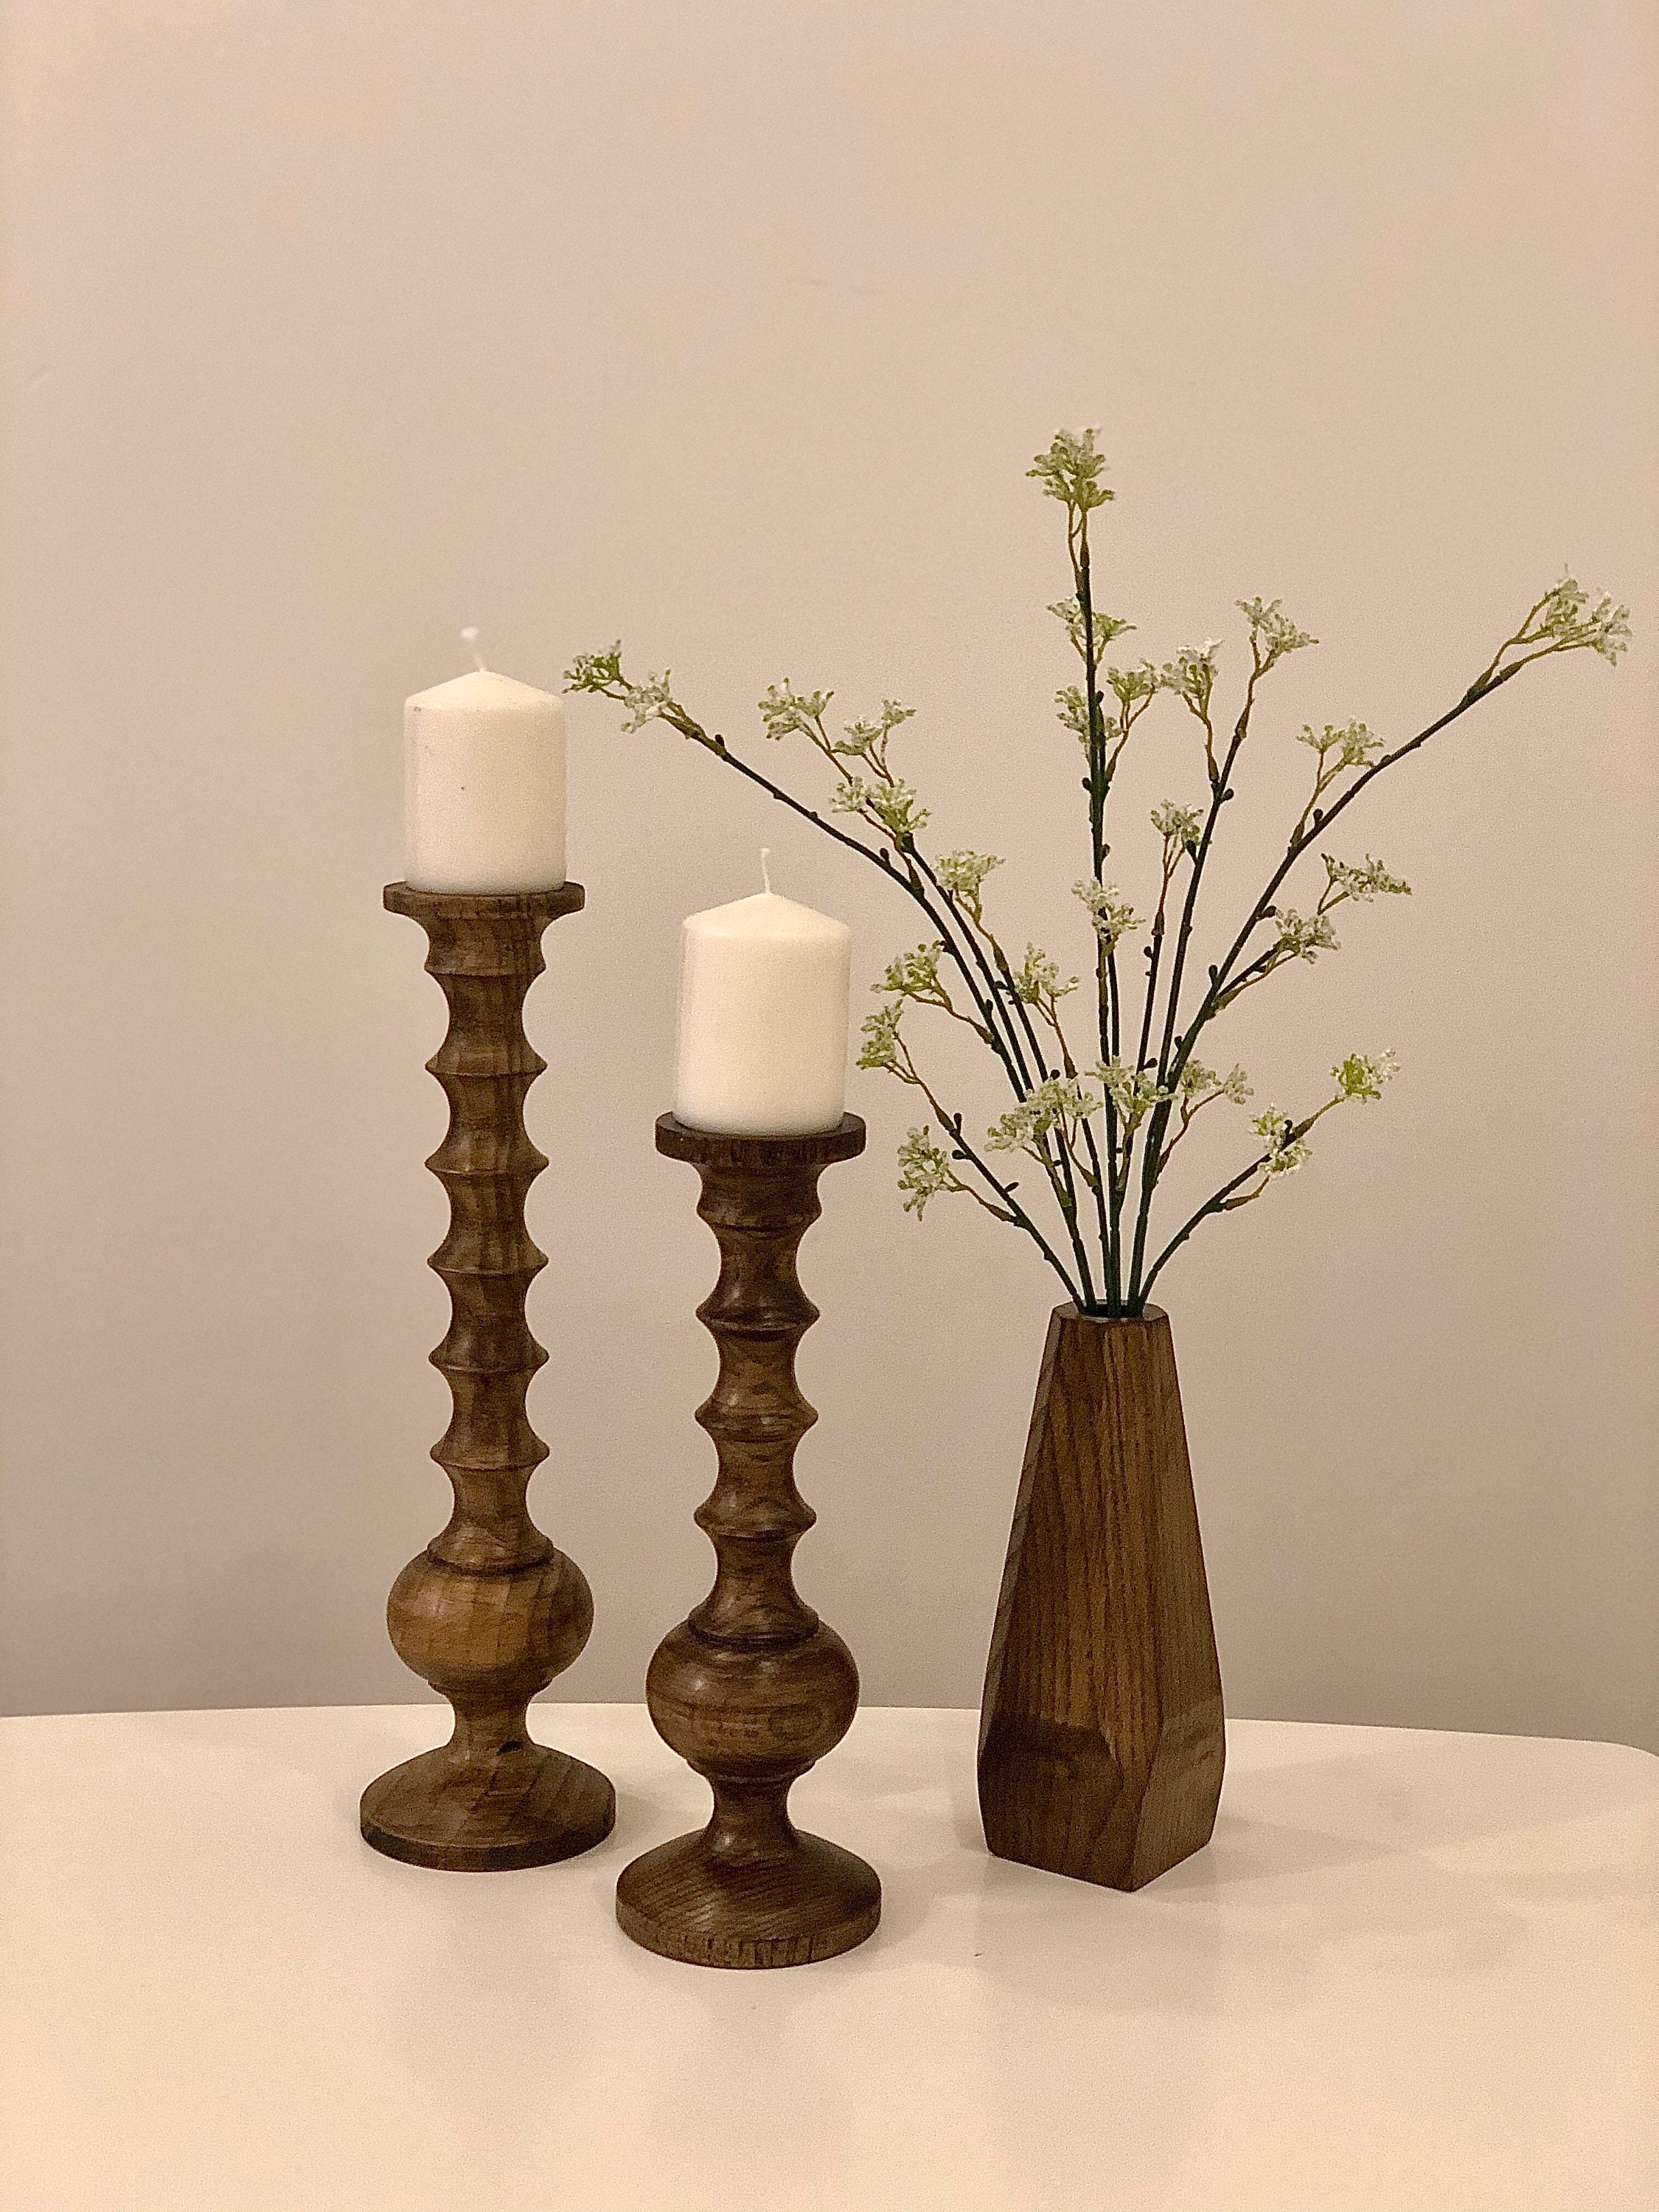 Pavelle Multiple Scented Candle Accessories with Wood Holder